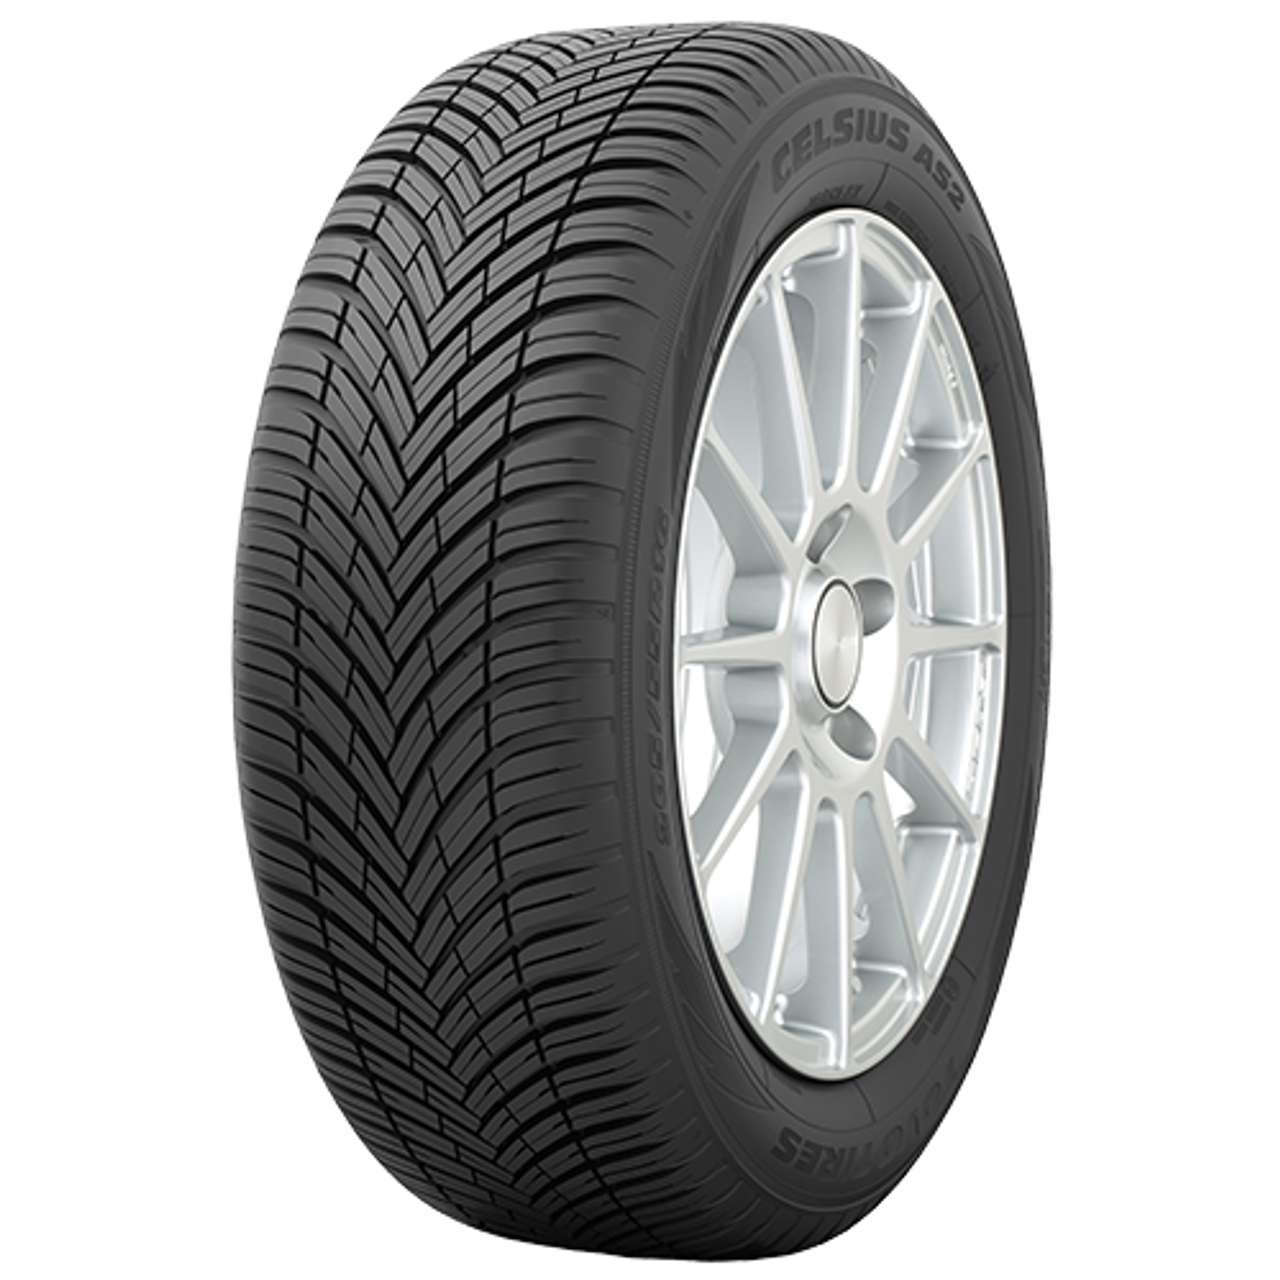 TOYO CELSIUS AS2 195/55R16 91V BSW